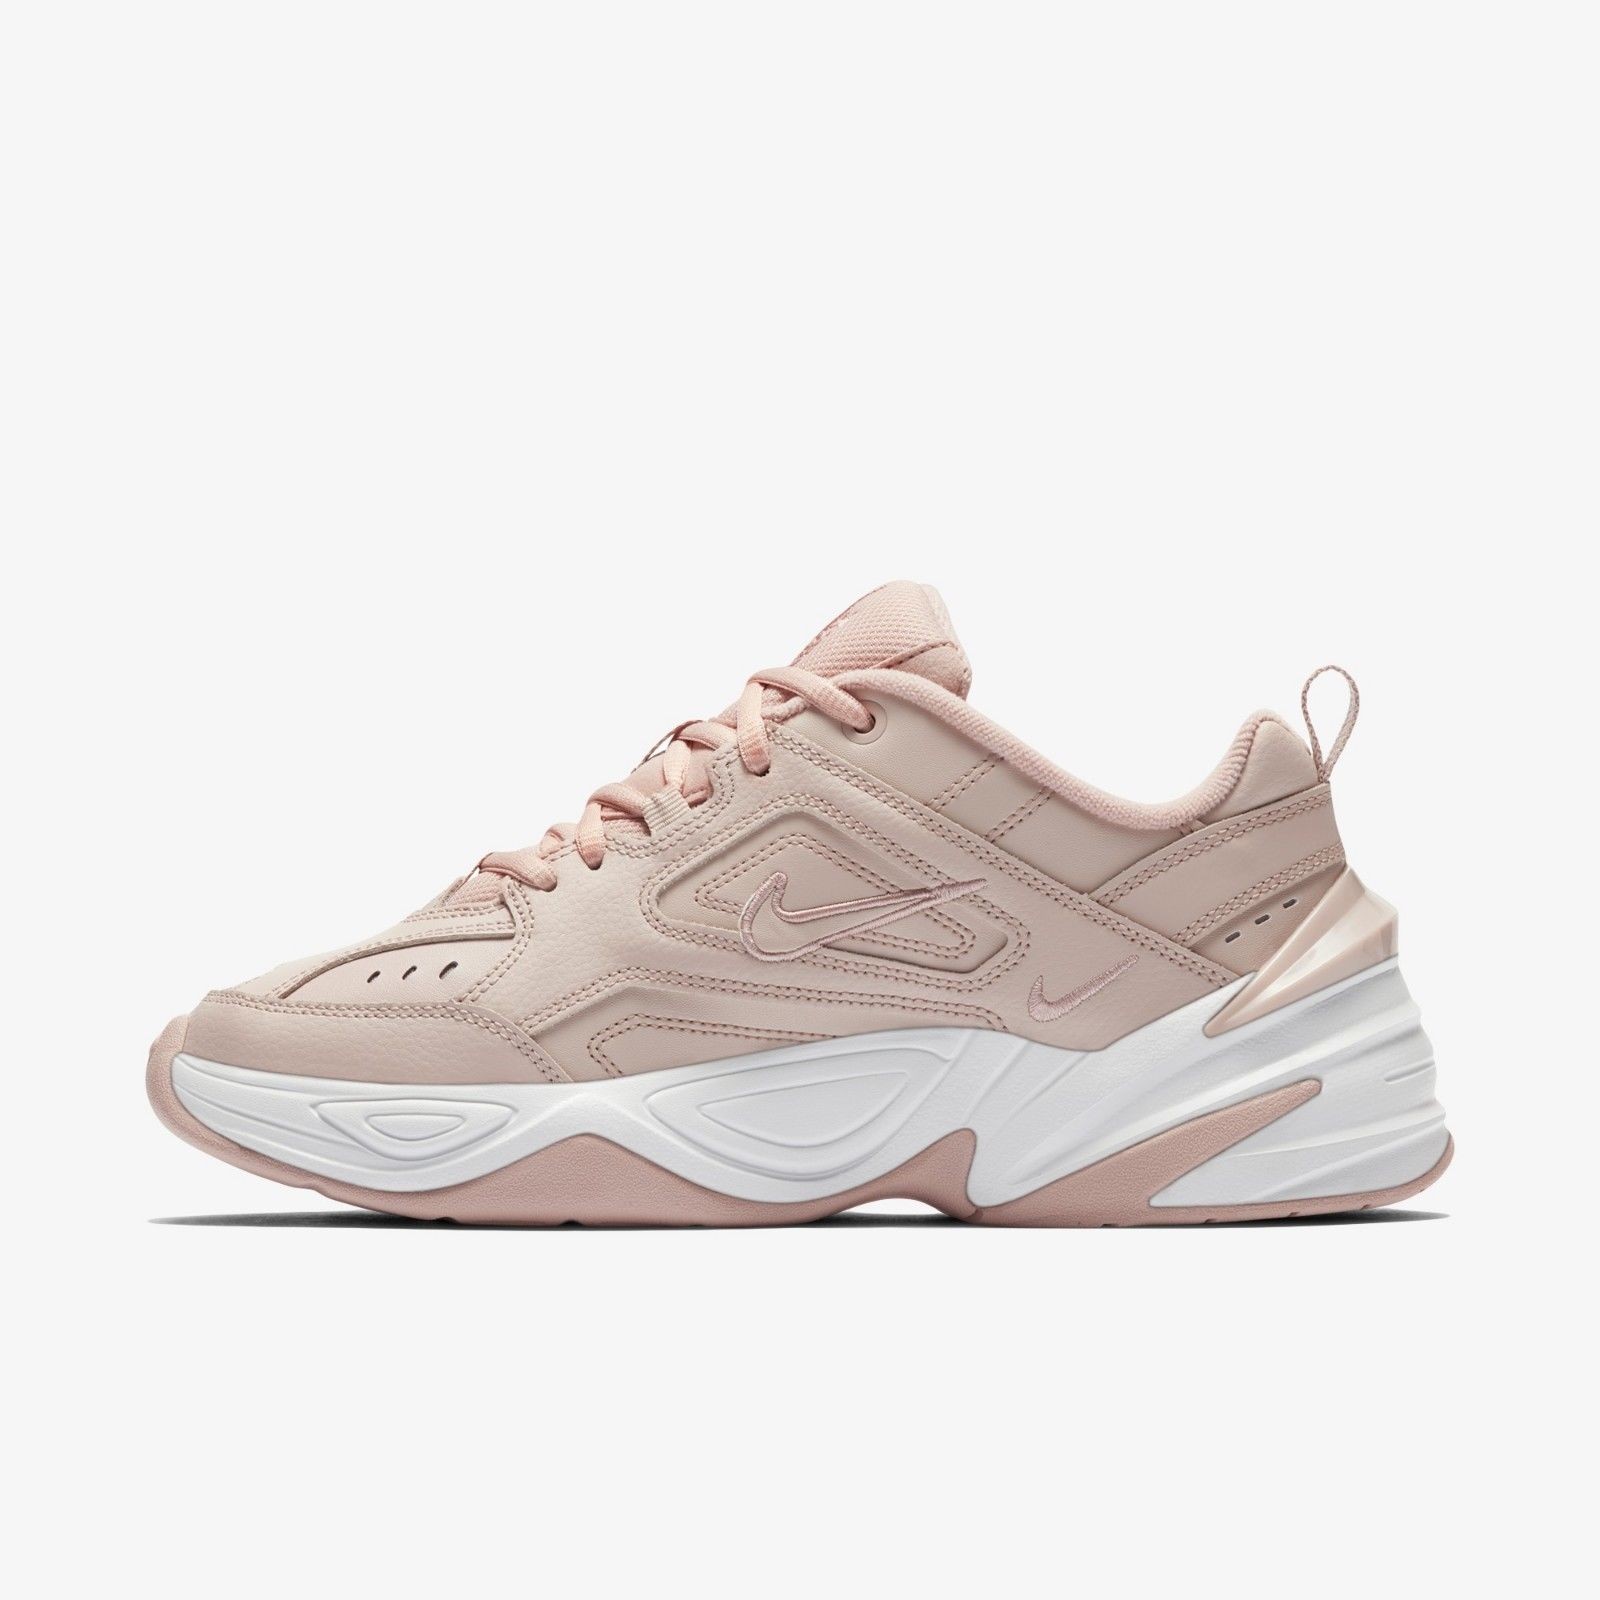 Nike M2K Tekno Particle Beige White Women Shoes Sneakers AO3108-202 ...